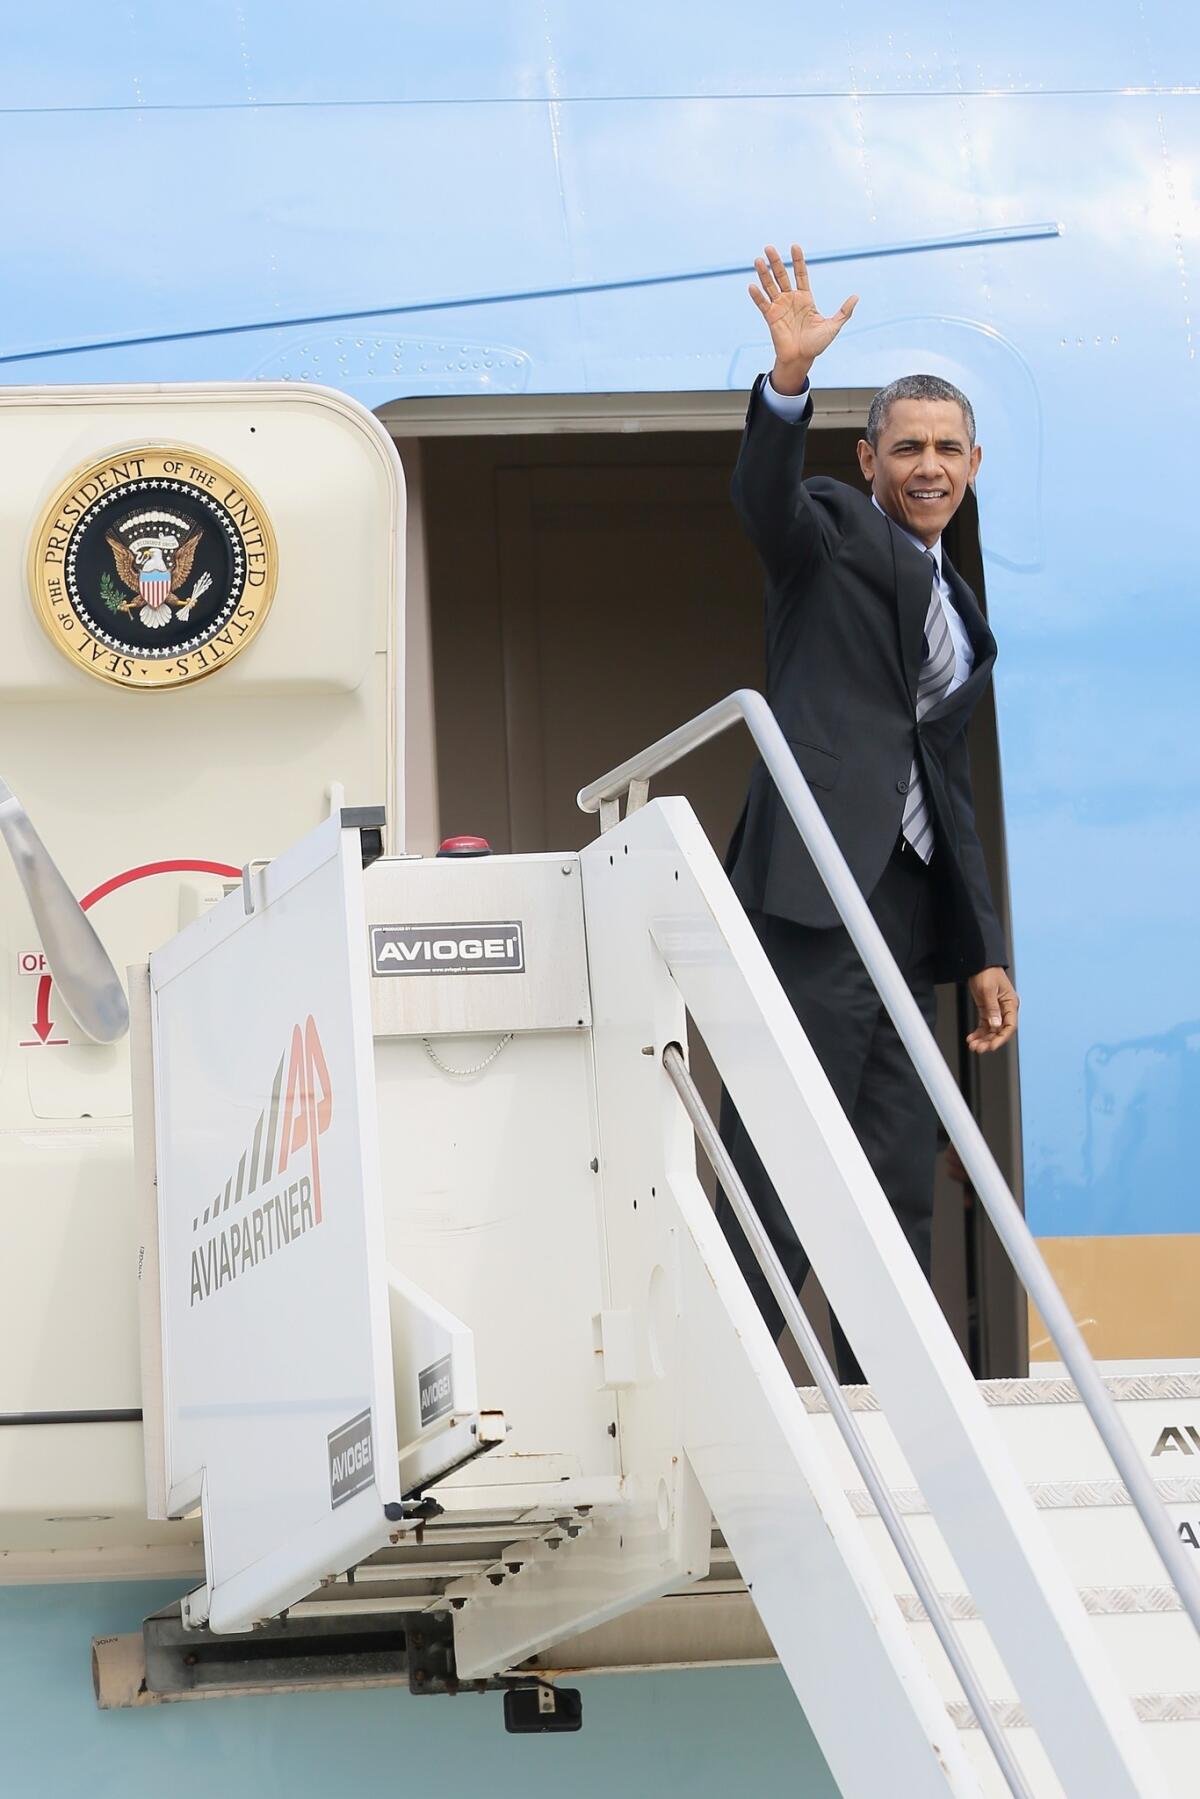 President Obama waves from Air Force One as he leaves Rome for Saudi Arabia.